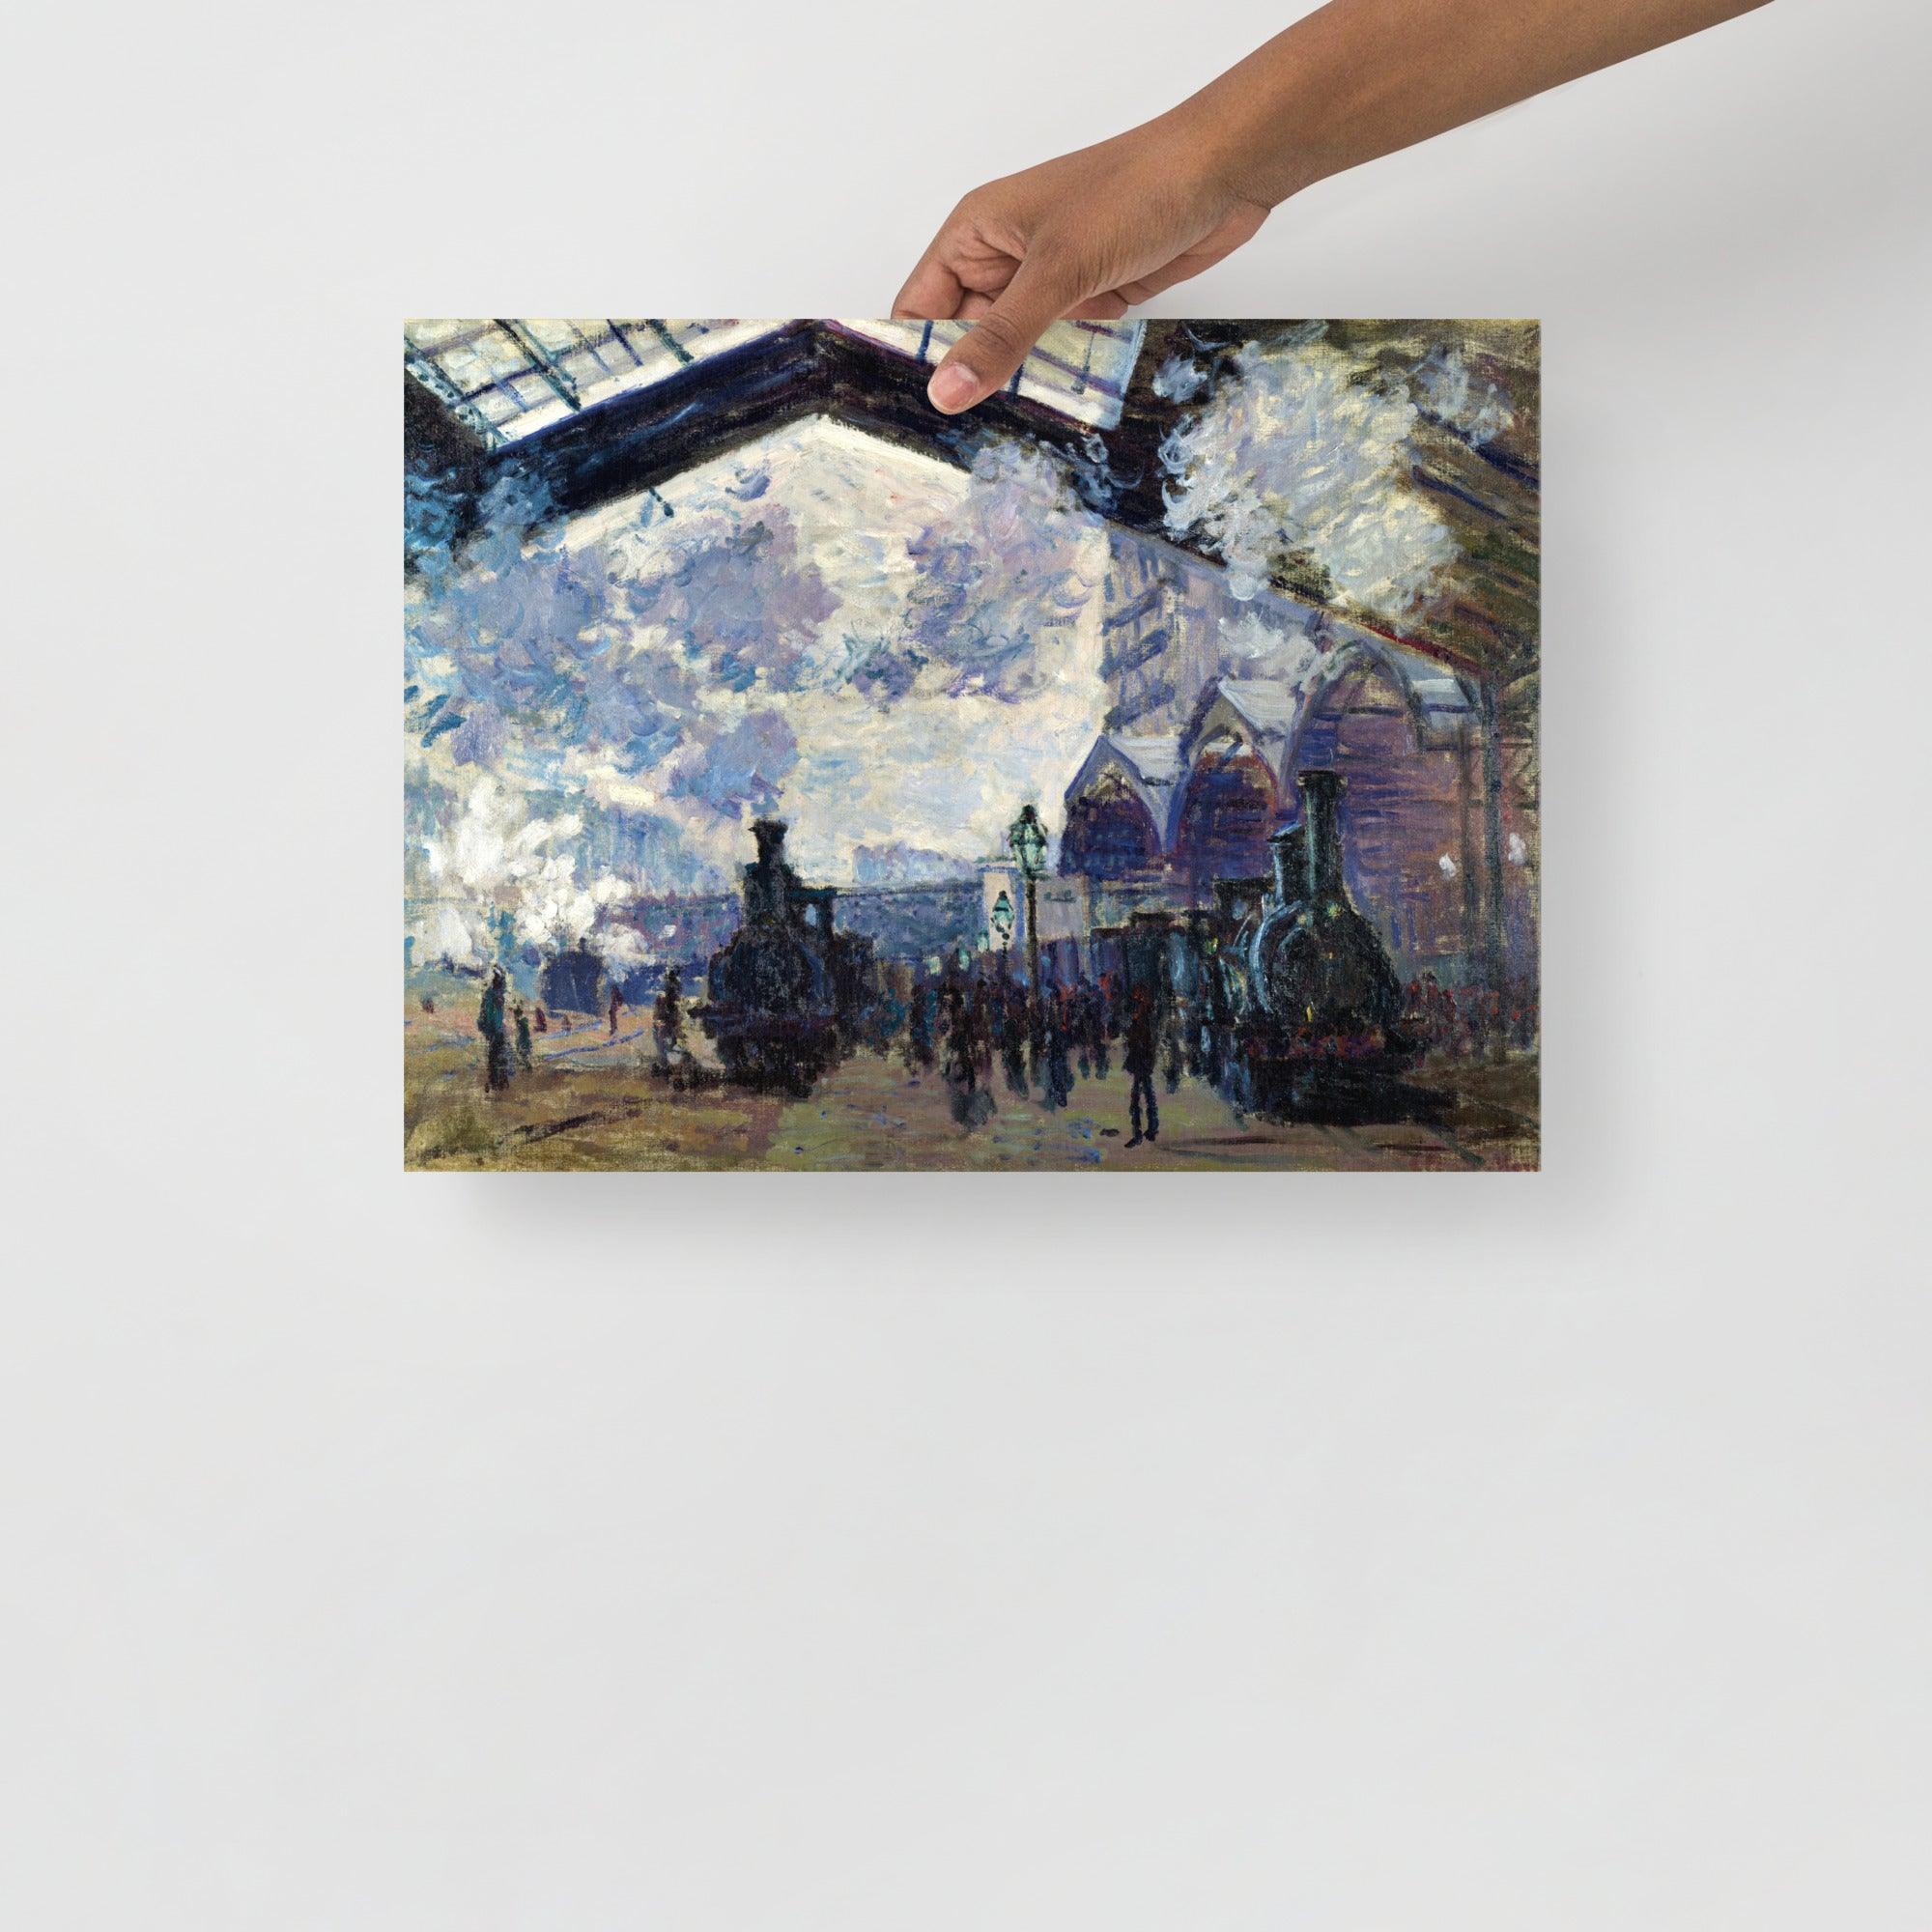 The Gare St-Lazare by Claude Monet  poster on a plain backdrop in size 12x16”.